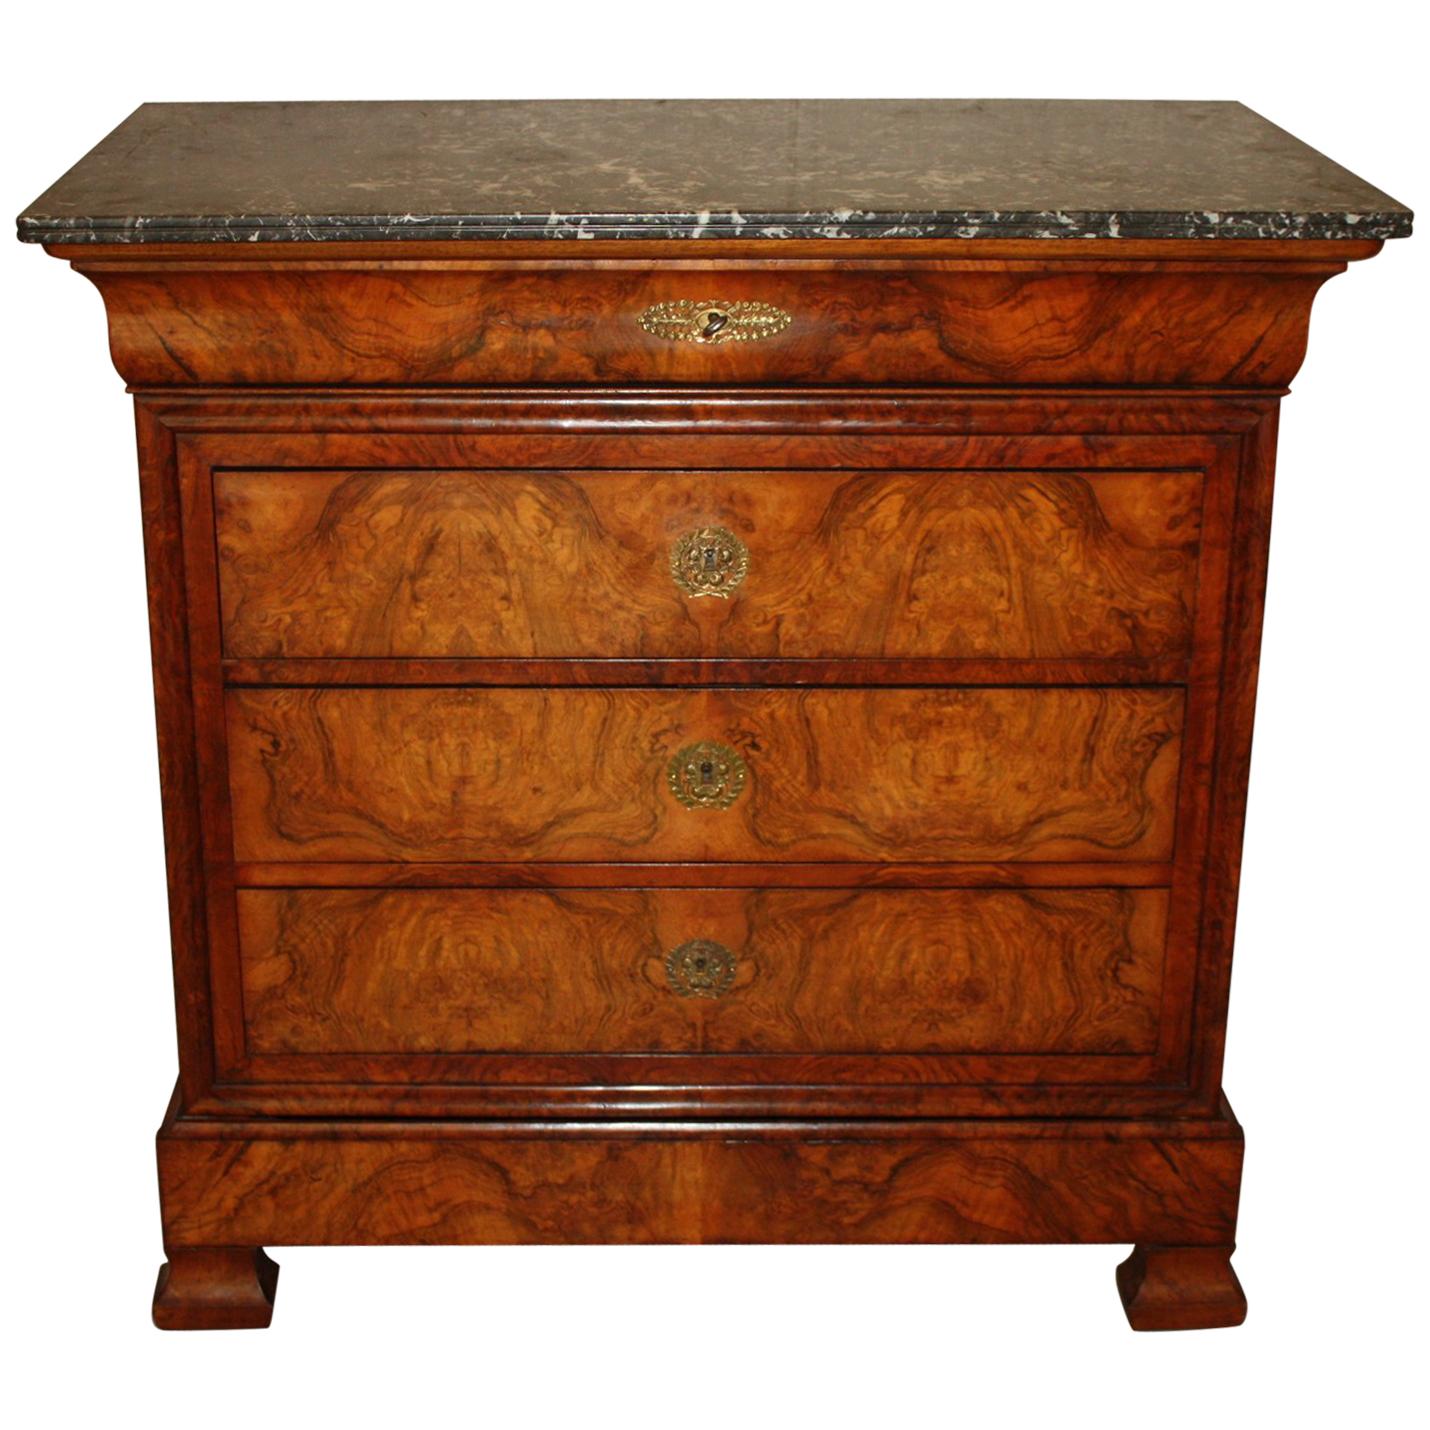 Marble-Top Louise Philippe Walnut Commode